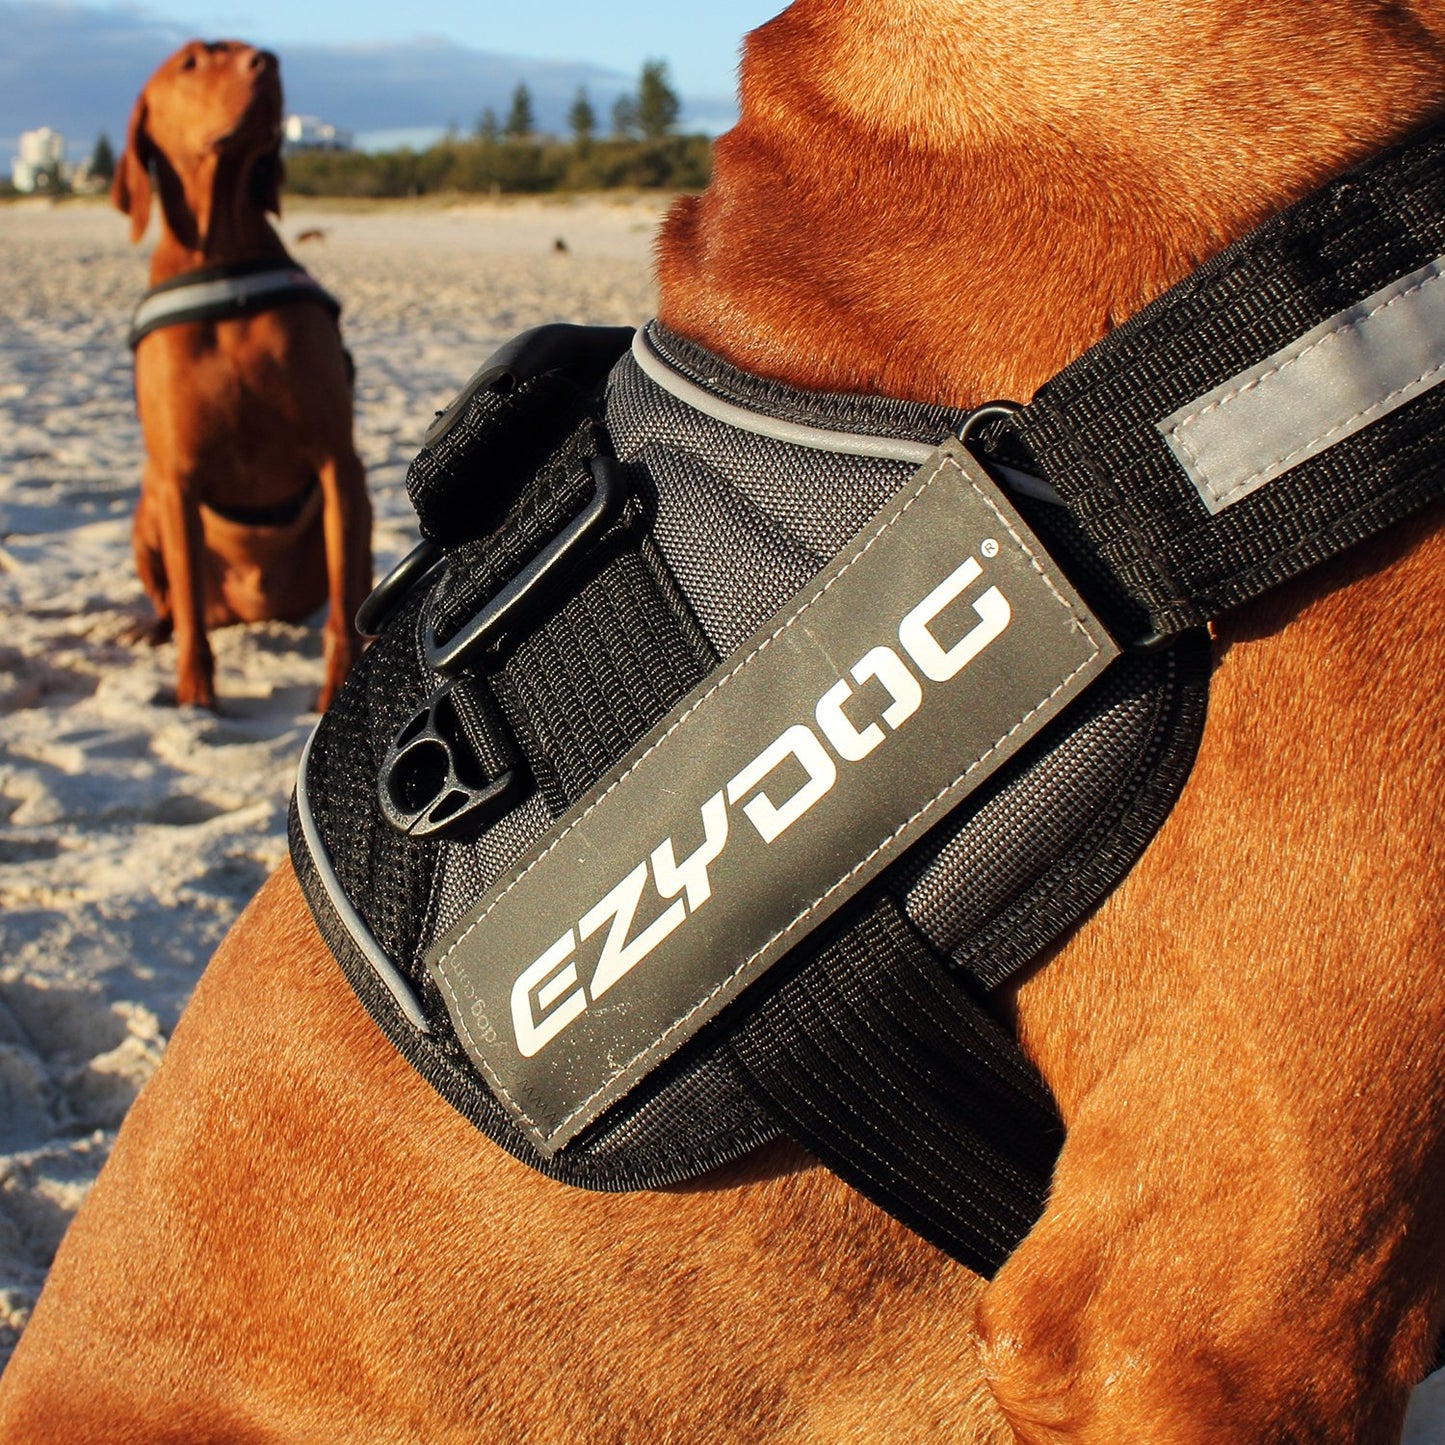 EzyDog Side Badge - Clearly Identifies Your Dog When Wearing The Convert Dog Harness - Set of Two Badges (Guide Dog, Large)